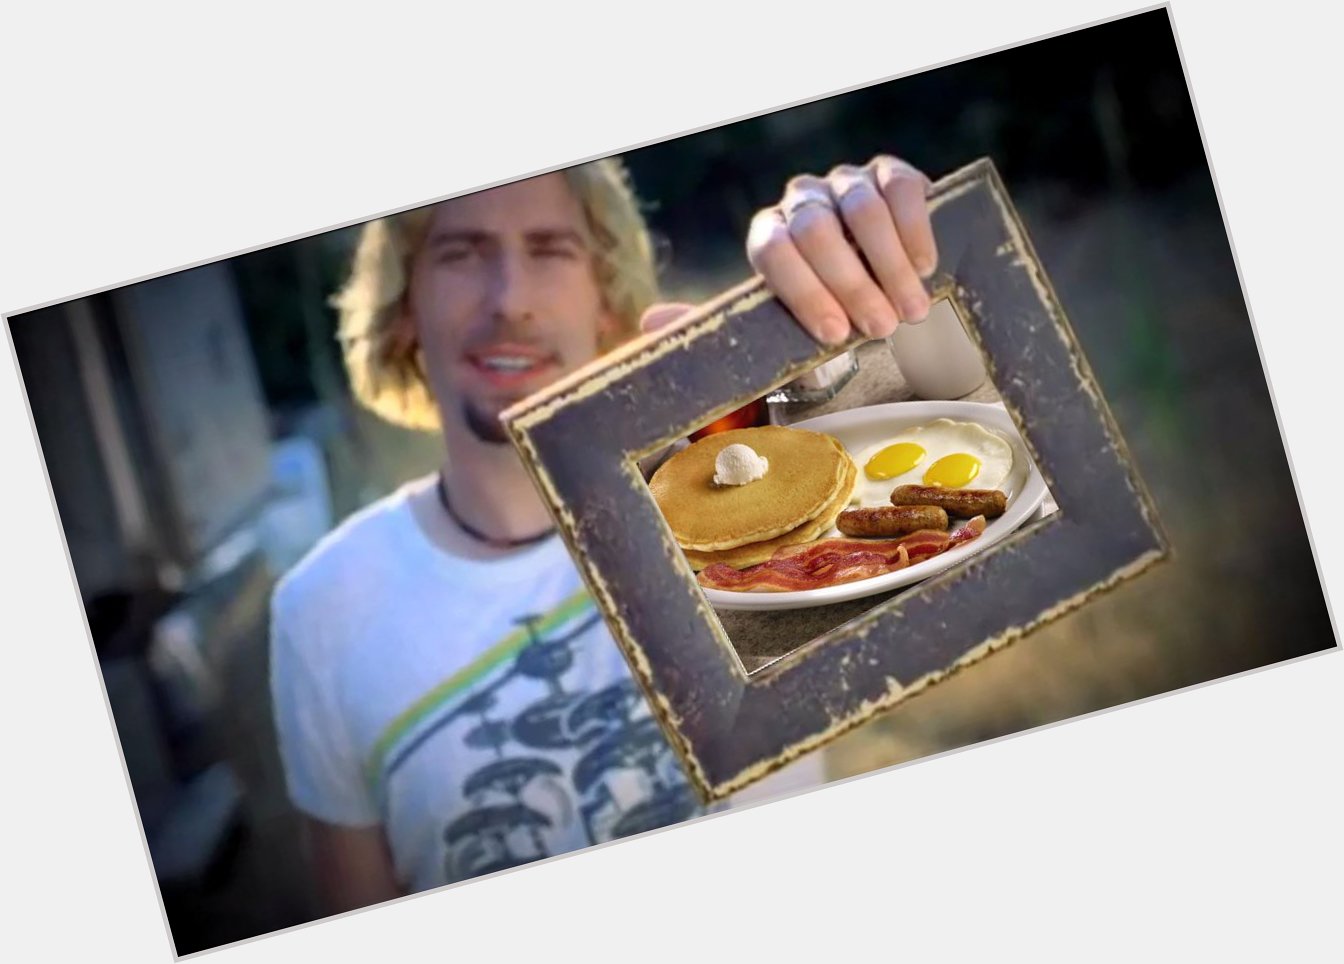 Happy Birthday Chad Kroeger!   \"Look at this FREE Grand Slam\" 